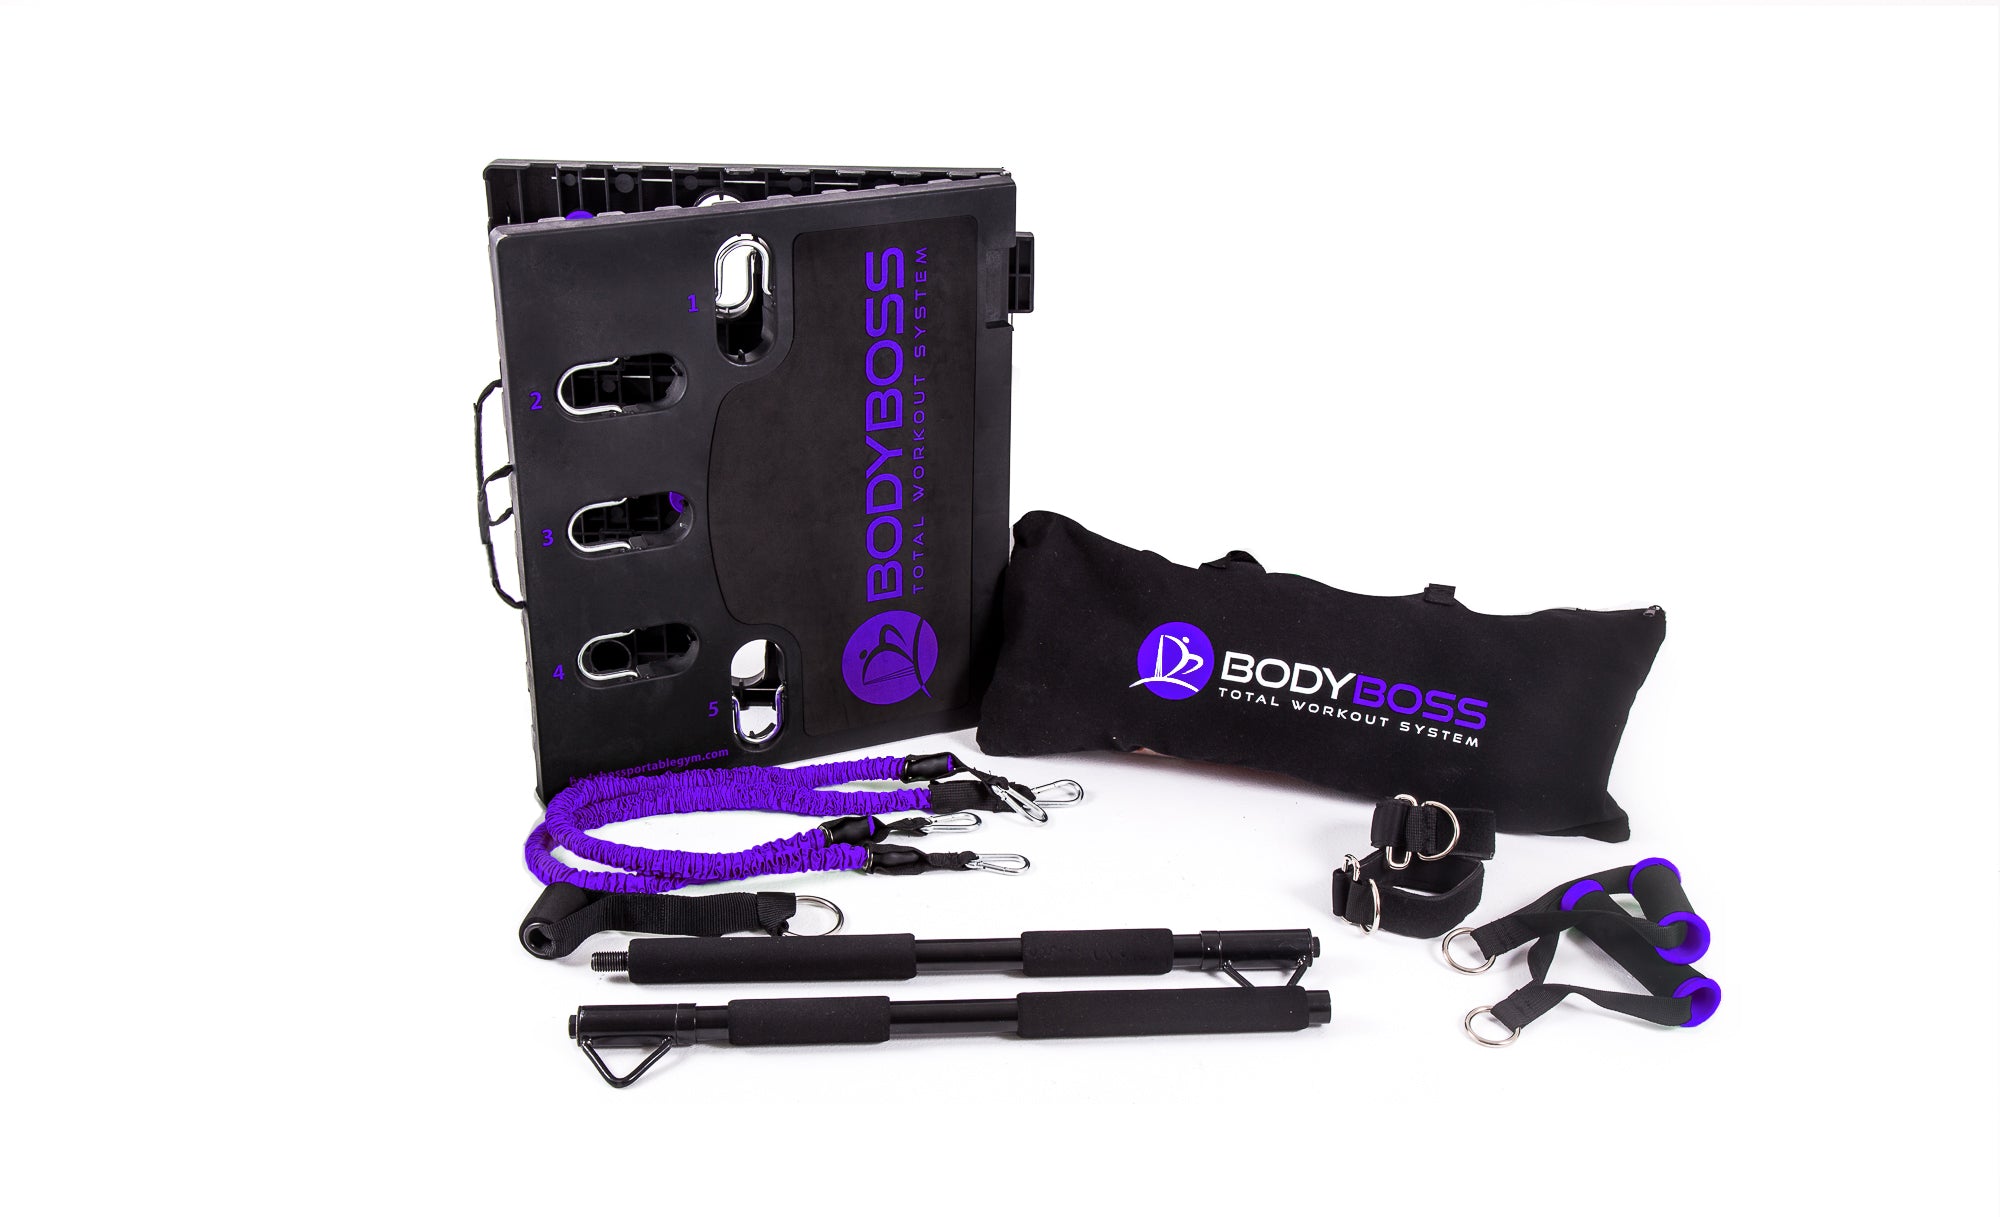 BodyBoss Home Gym 2.0 - Full Portable Gym Home Workout Package - PKG4-Purple